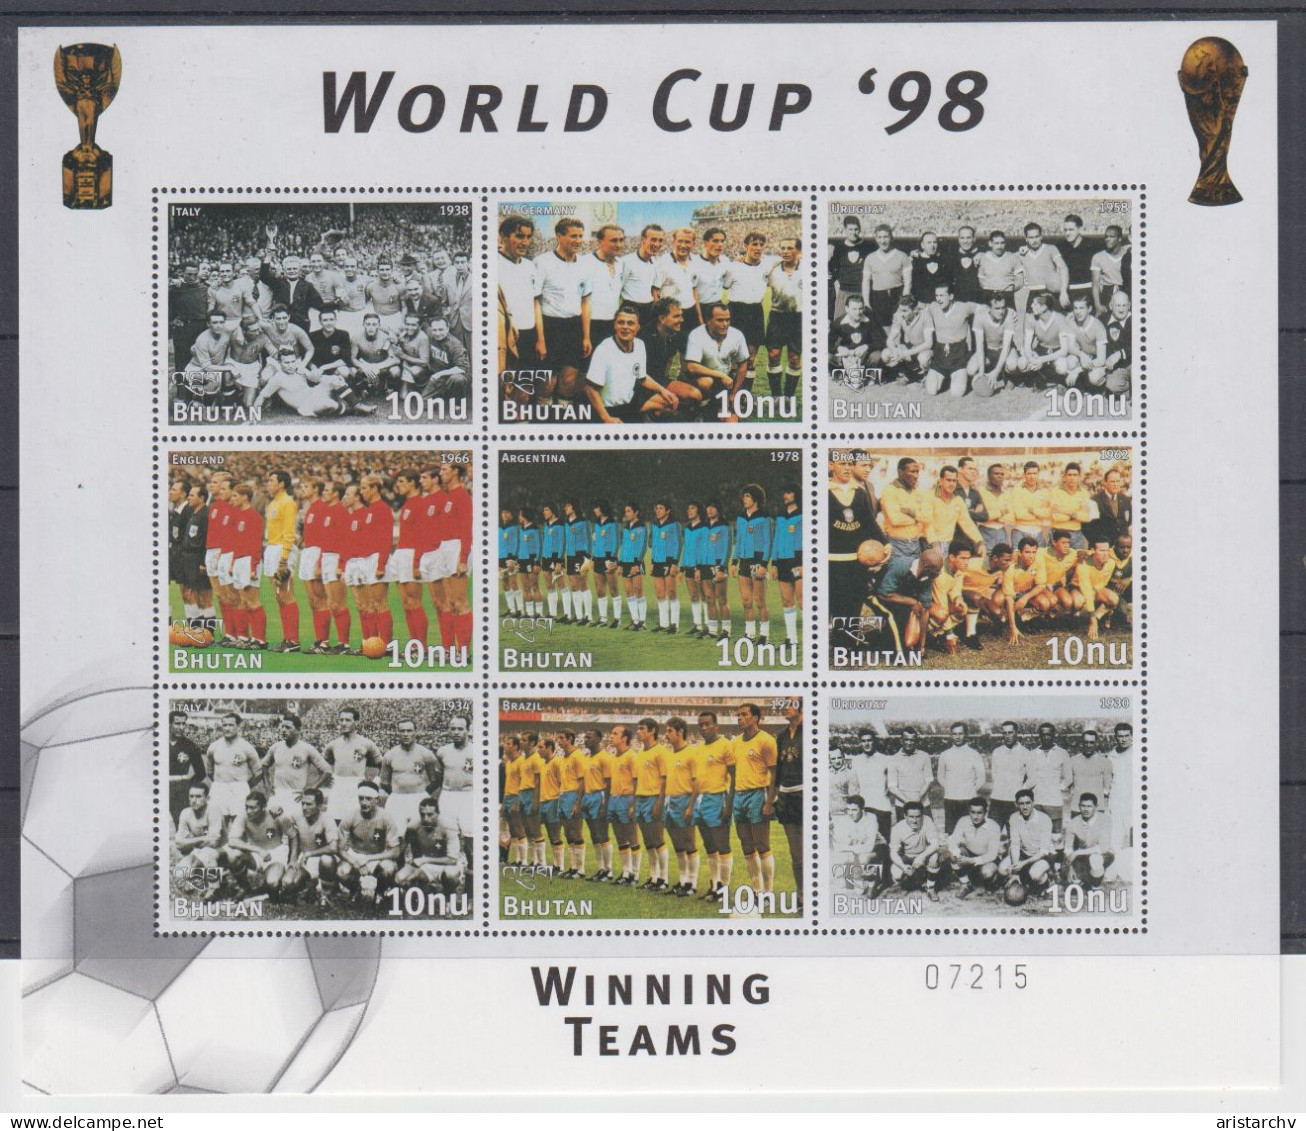 BHUTAN 1998 FOOTBALL WORLD CUP 2 S/SHEETS 2 SHEETLETS AND 6 STAMPS - 1998 – France